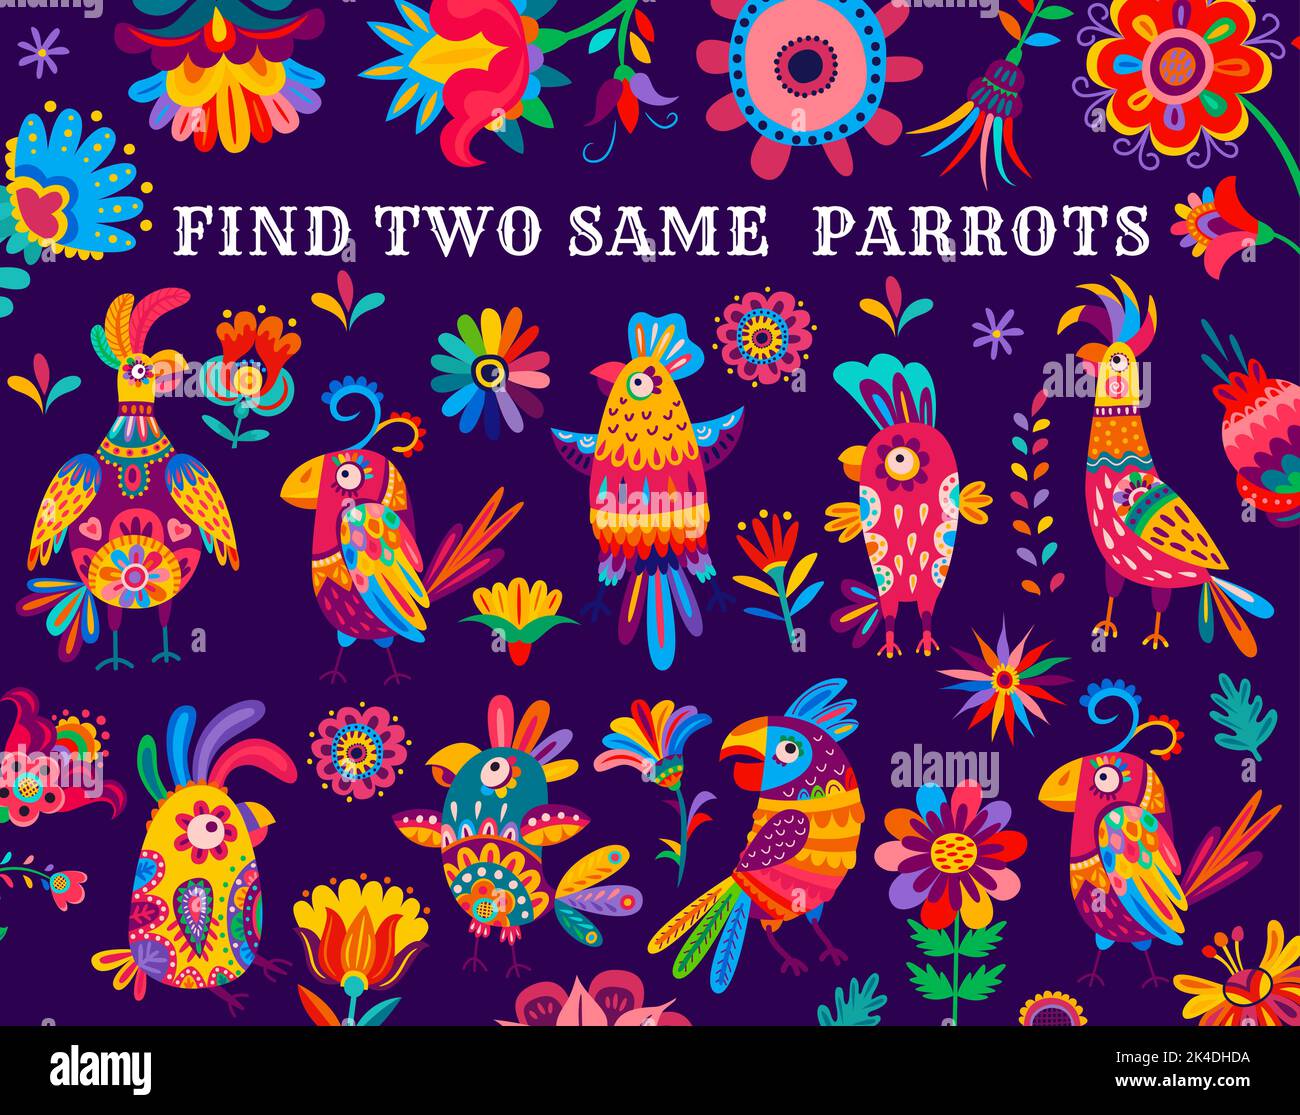 Find two same brazilian parrots kids game worksheet. Vector puzzle quiz or matching riddle of cartoon tropical jungle parrot birds and exotic flowers with bright color feathers and ethnic ornaments Stock Vector